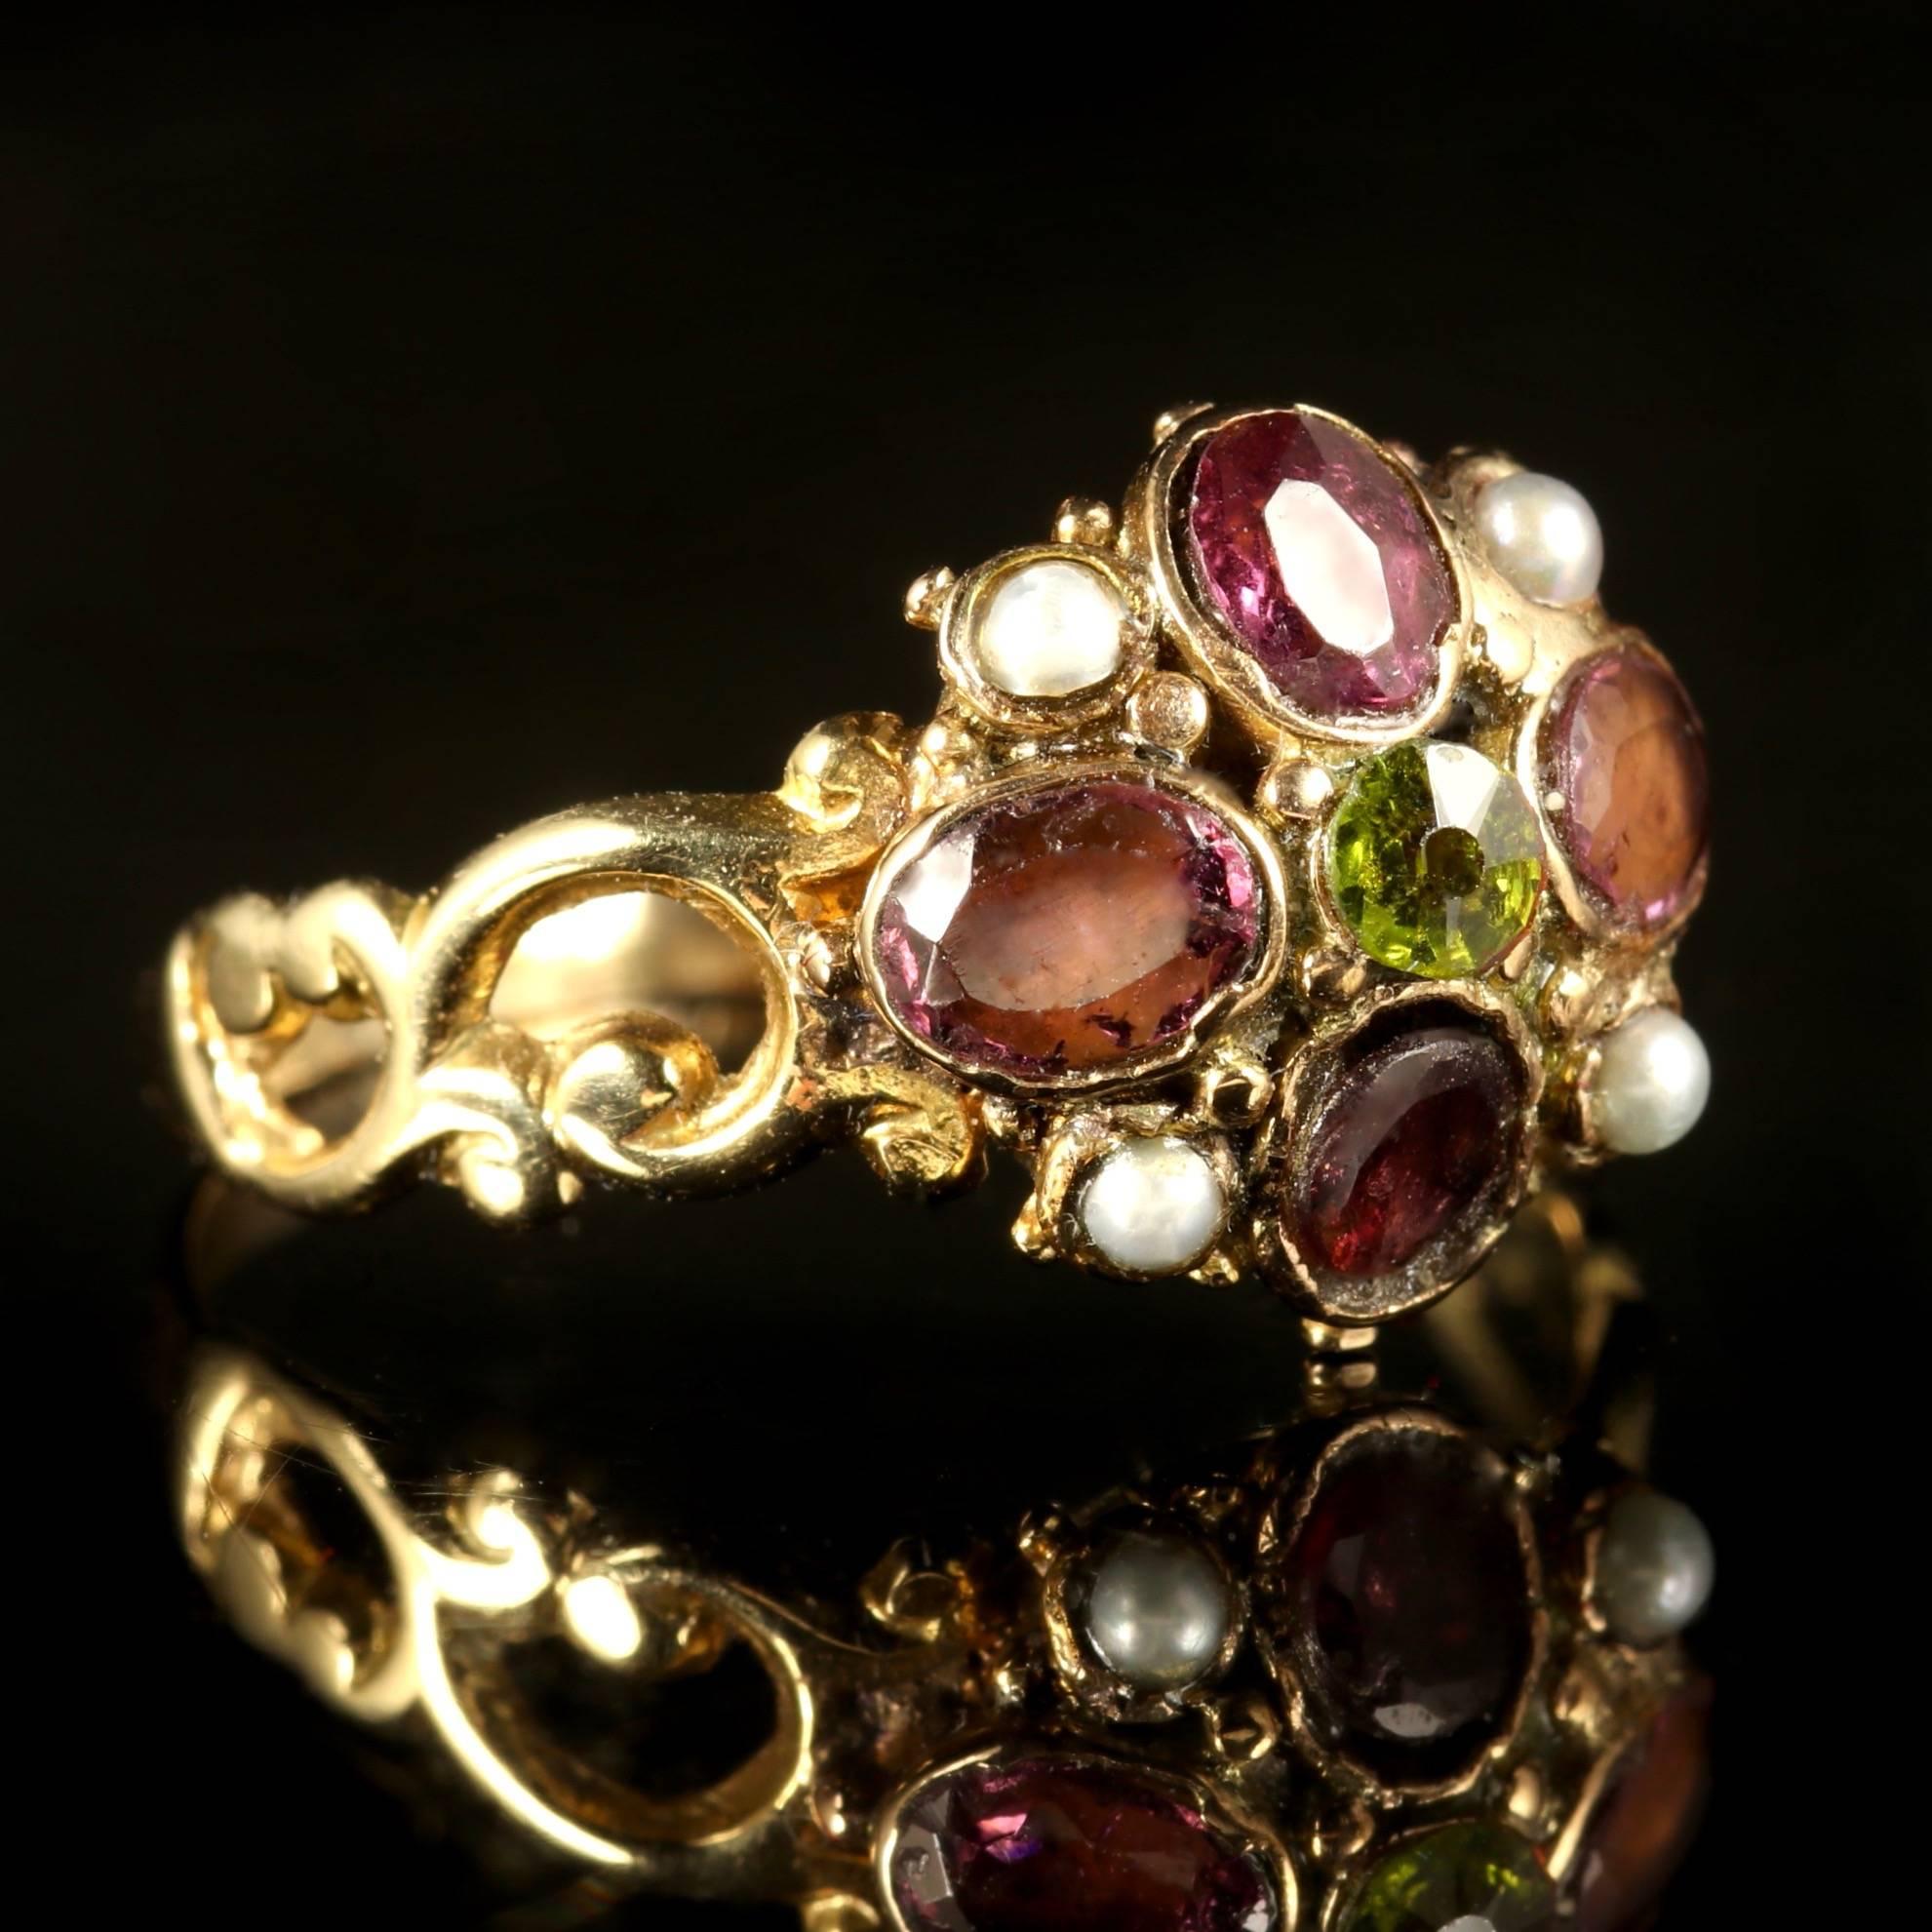 This spectacular 18ct Gold Georgian ring displays the Suffragette colours in gemstones.

Due to its age, Georgian jewellery is quite rare, with some pieces almost three hundred years old. From 1714 until 1837 four King Georges and a short-lived